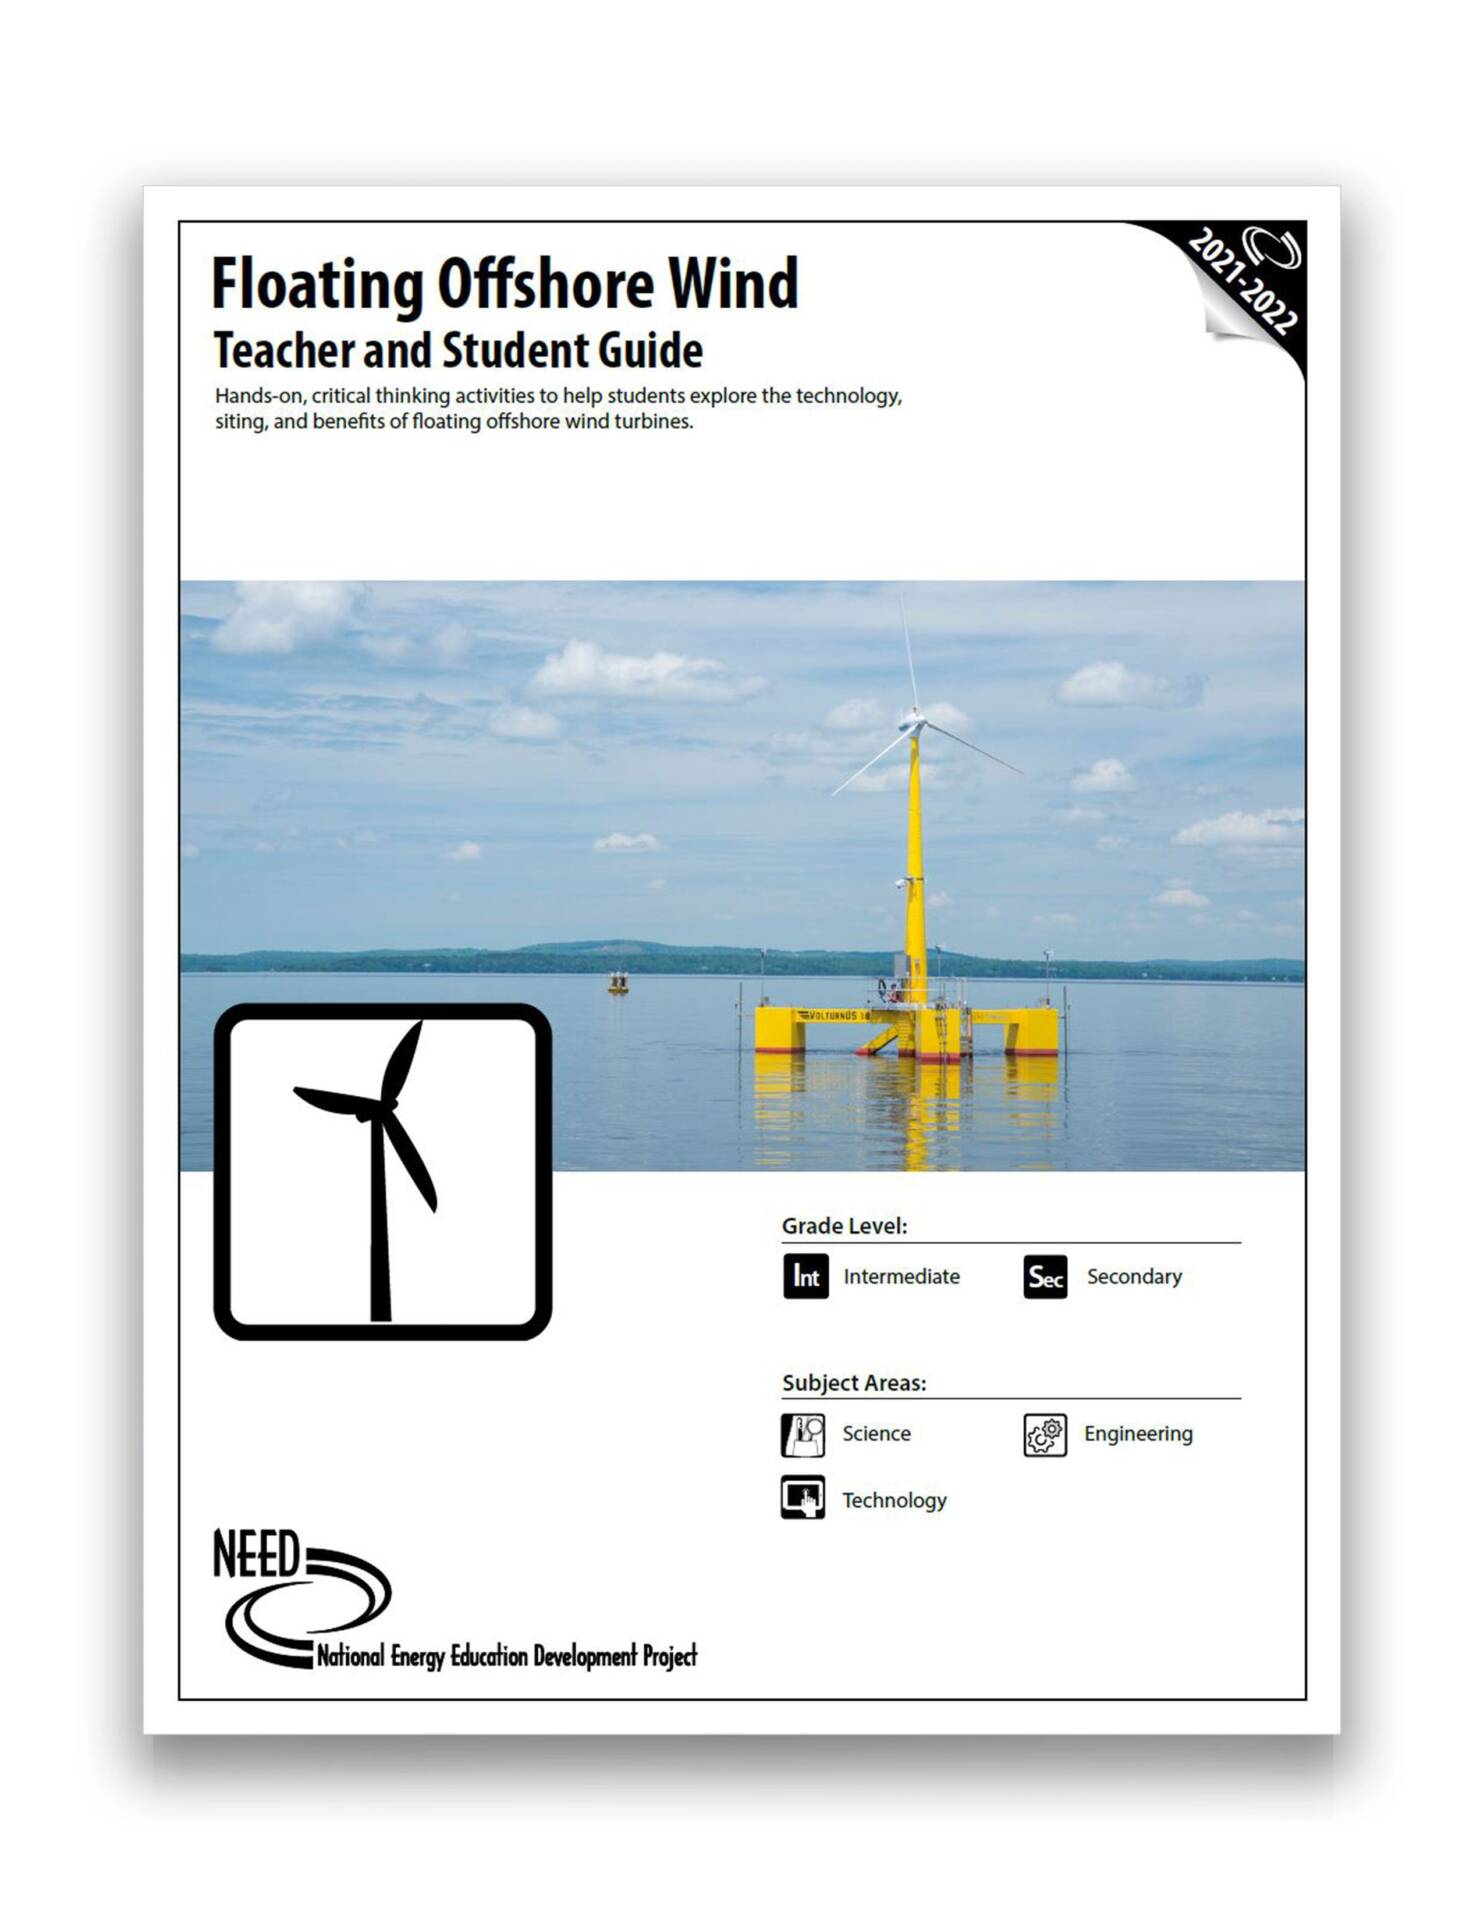 The cover of Floating Offshore Wind